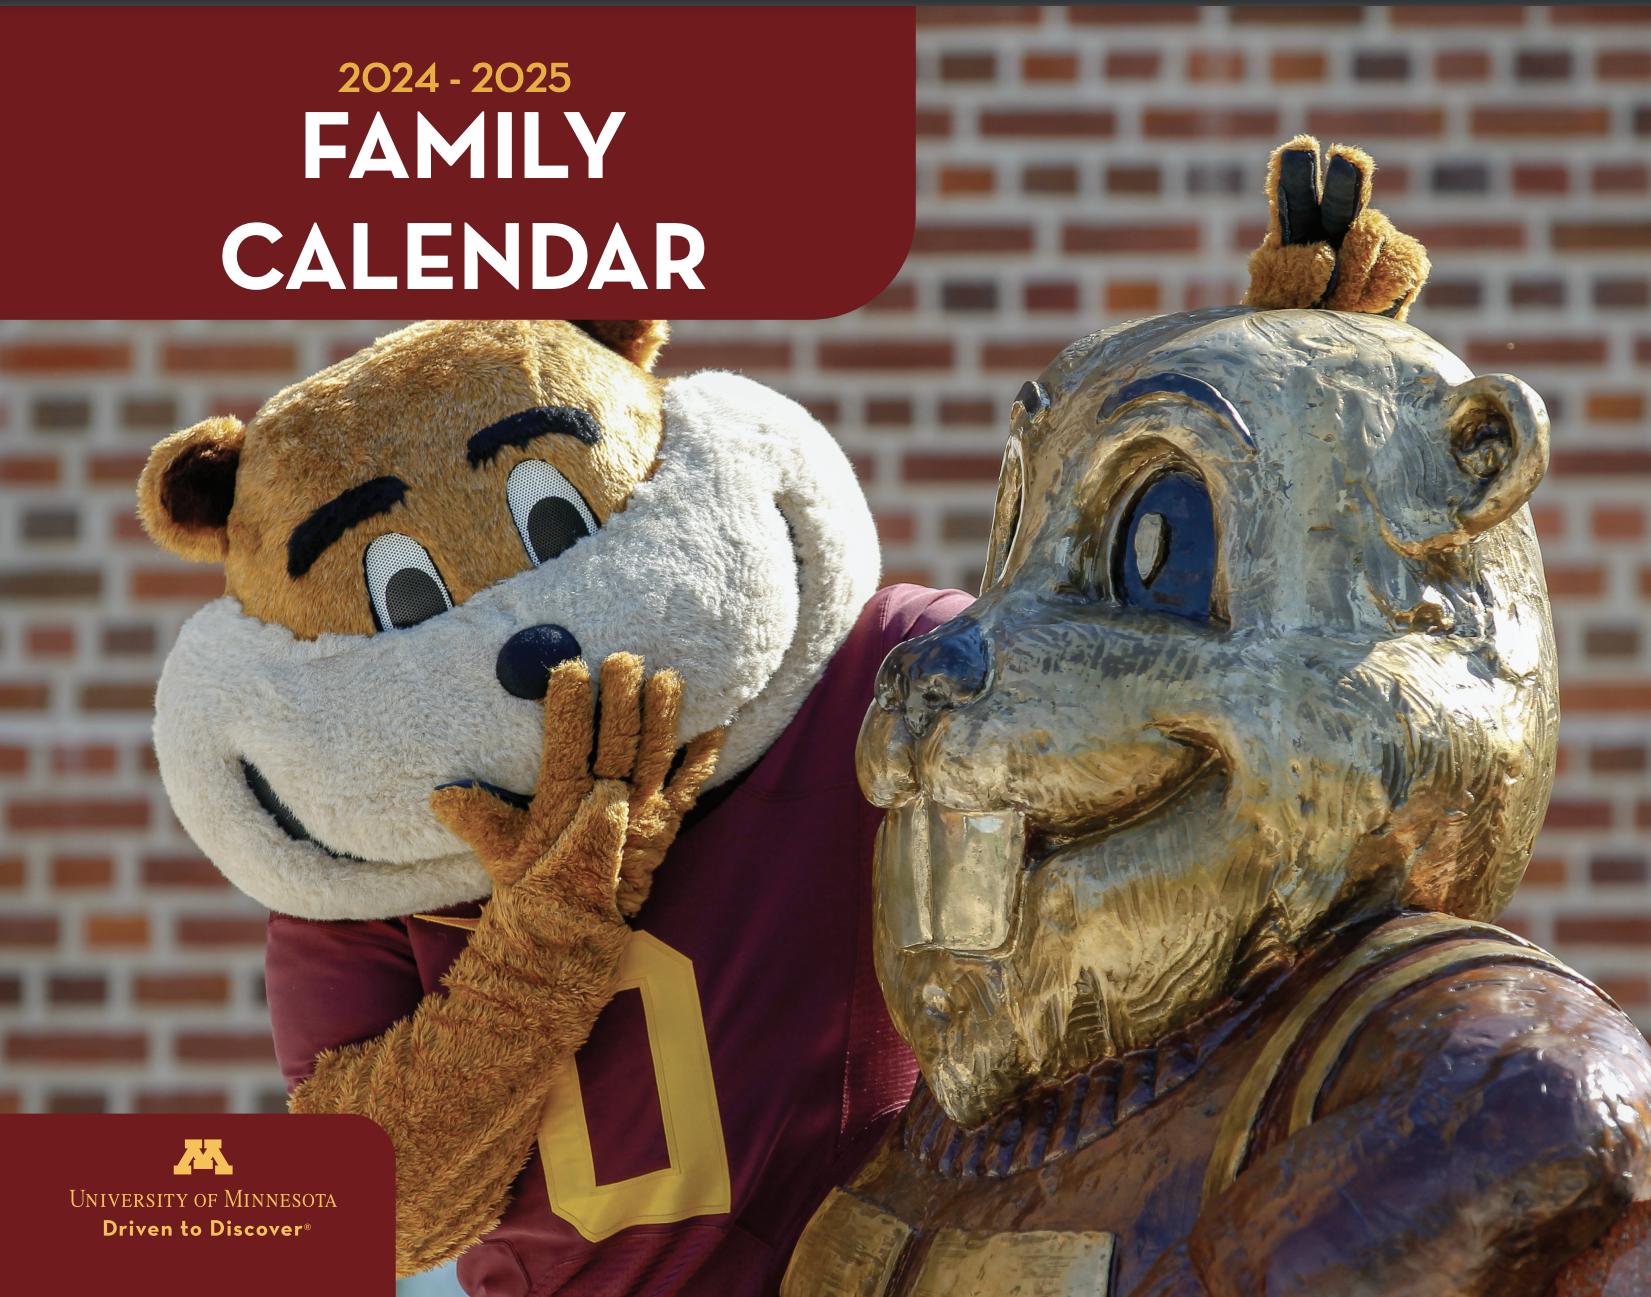 Family Calendar cover with Goldy mascot standing next to Gold statue